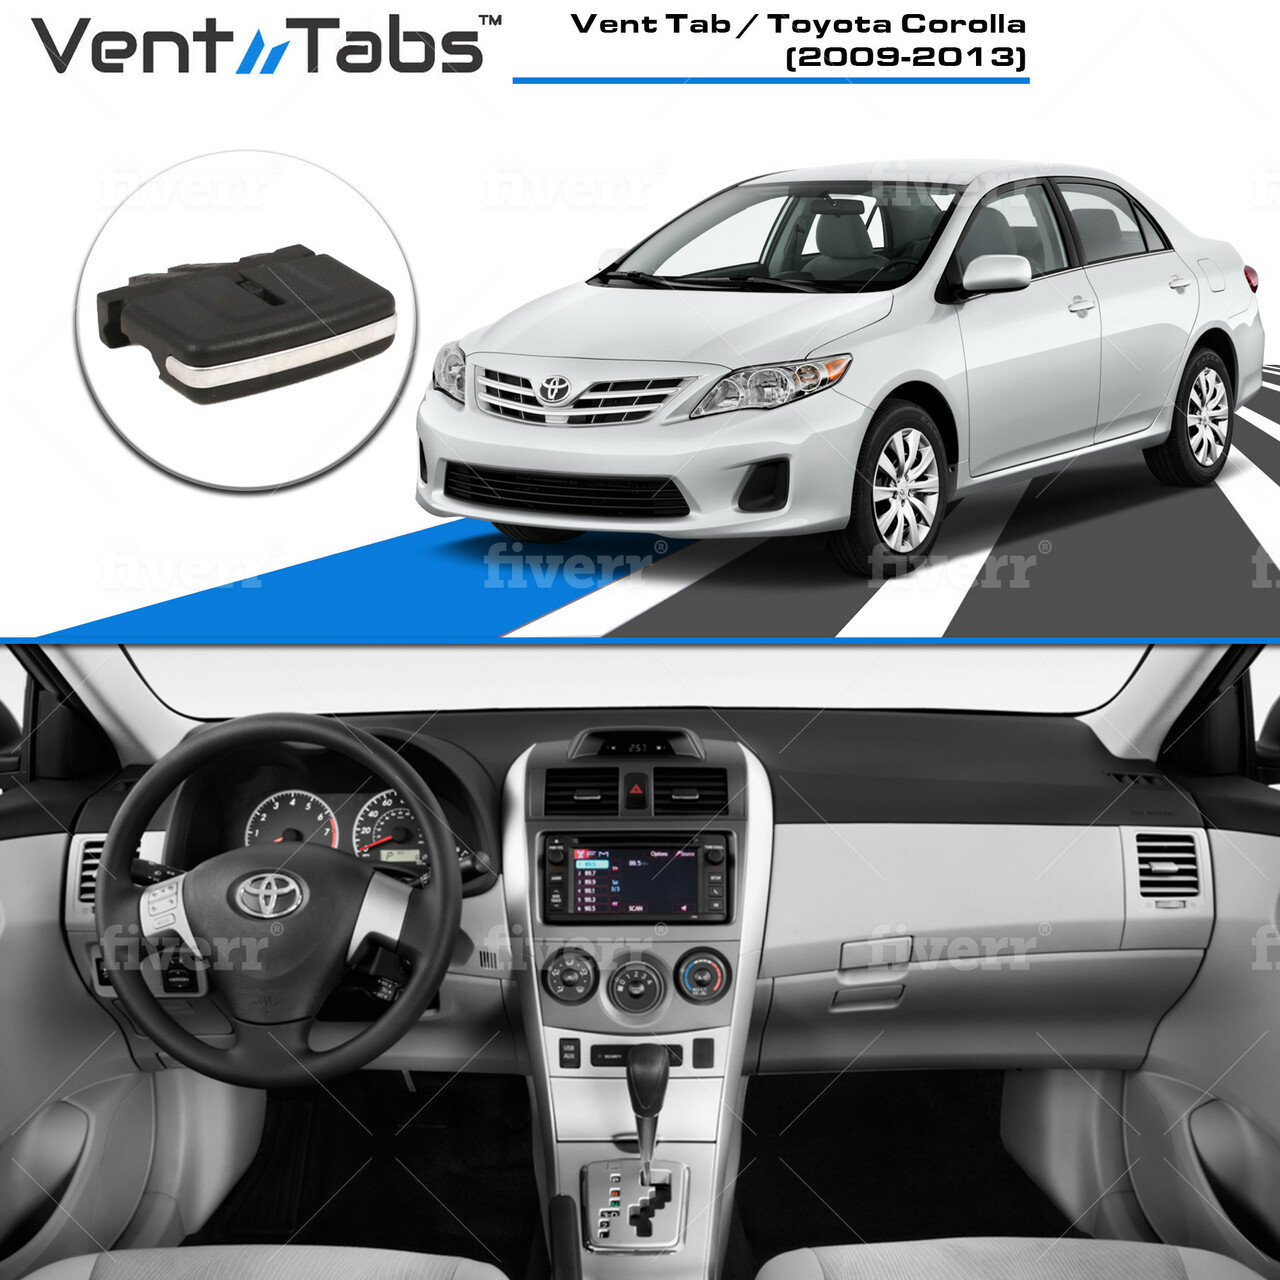 Venttabs for Toyota Corolla American Design Vent Outlet Tab Clip No Screws or Tools Required Air Conditioning Vent Replacement Tab30-Second Installation Easy Clip on 2009-2013 